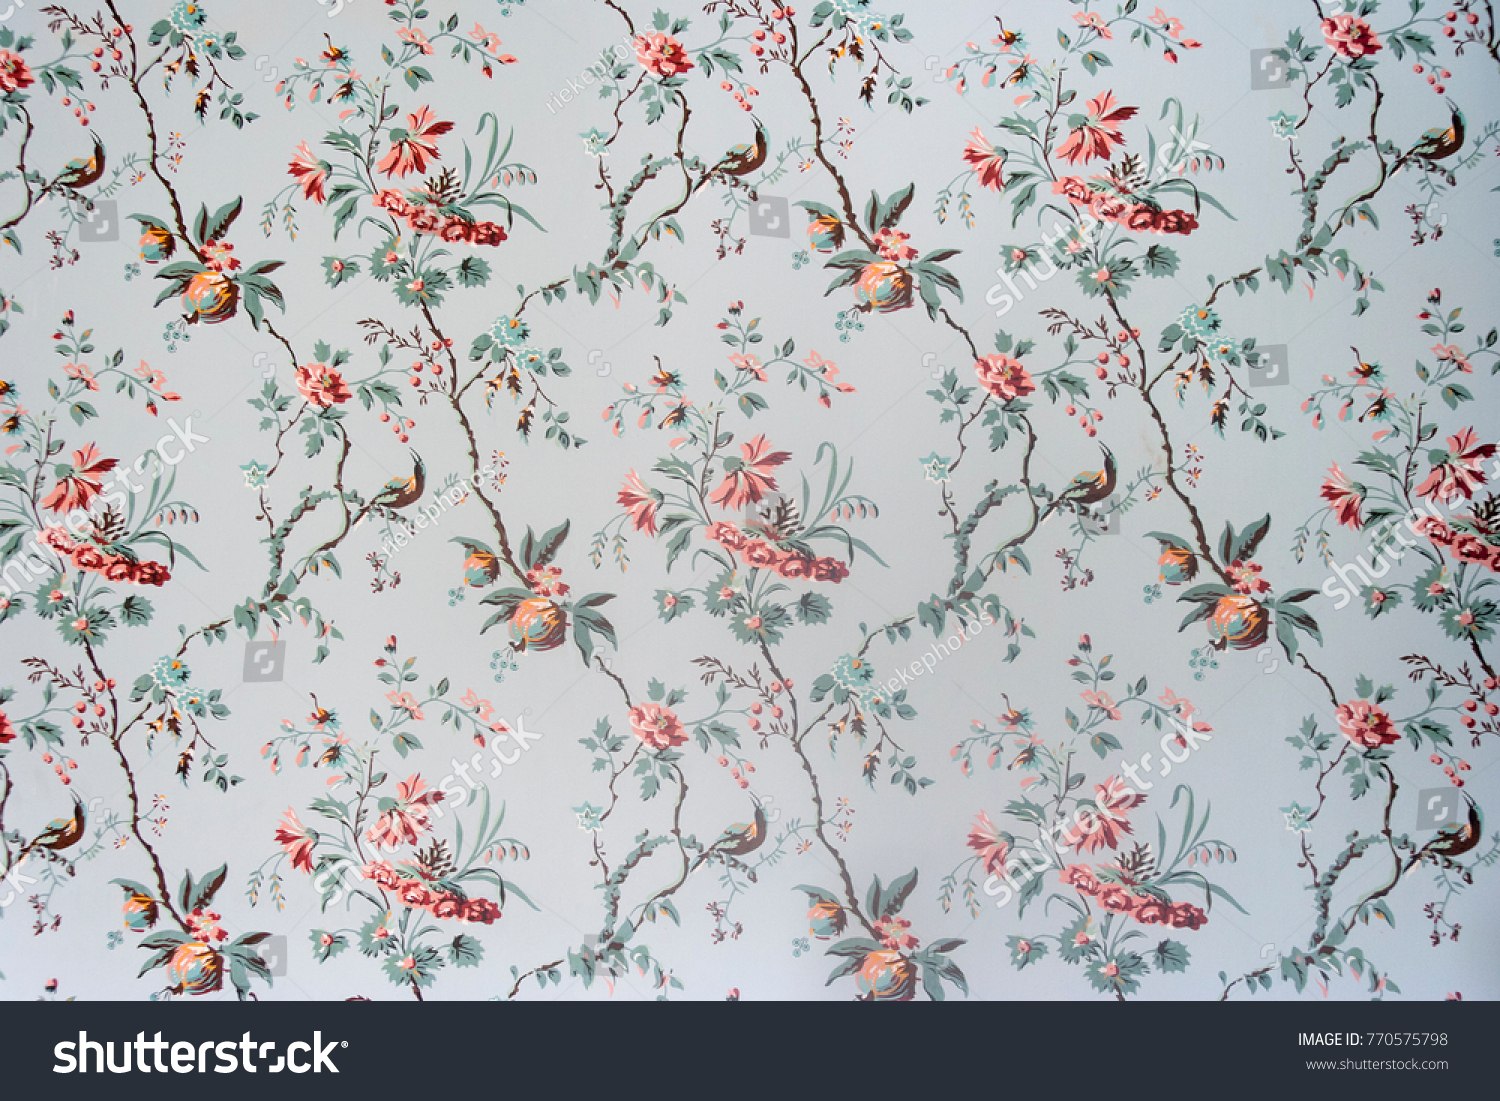 Vintage wallpaper - Floral pattern of 18th century #770575798